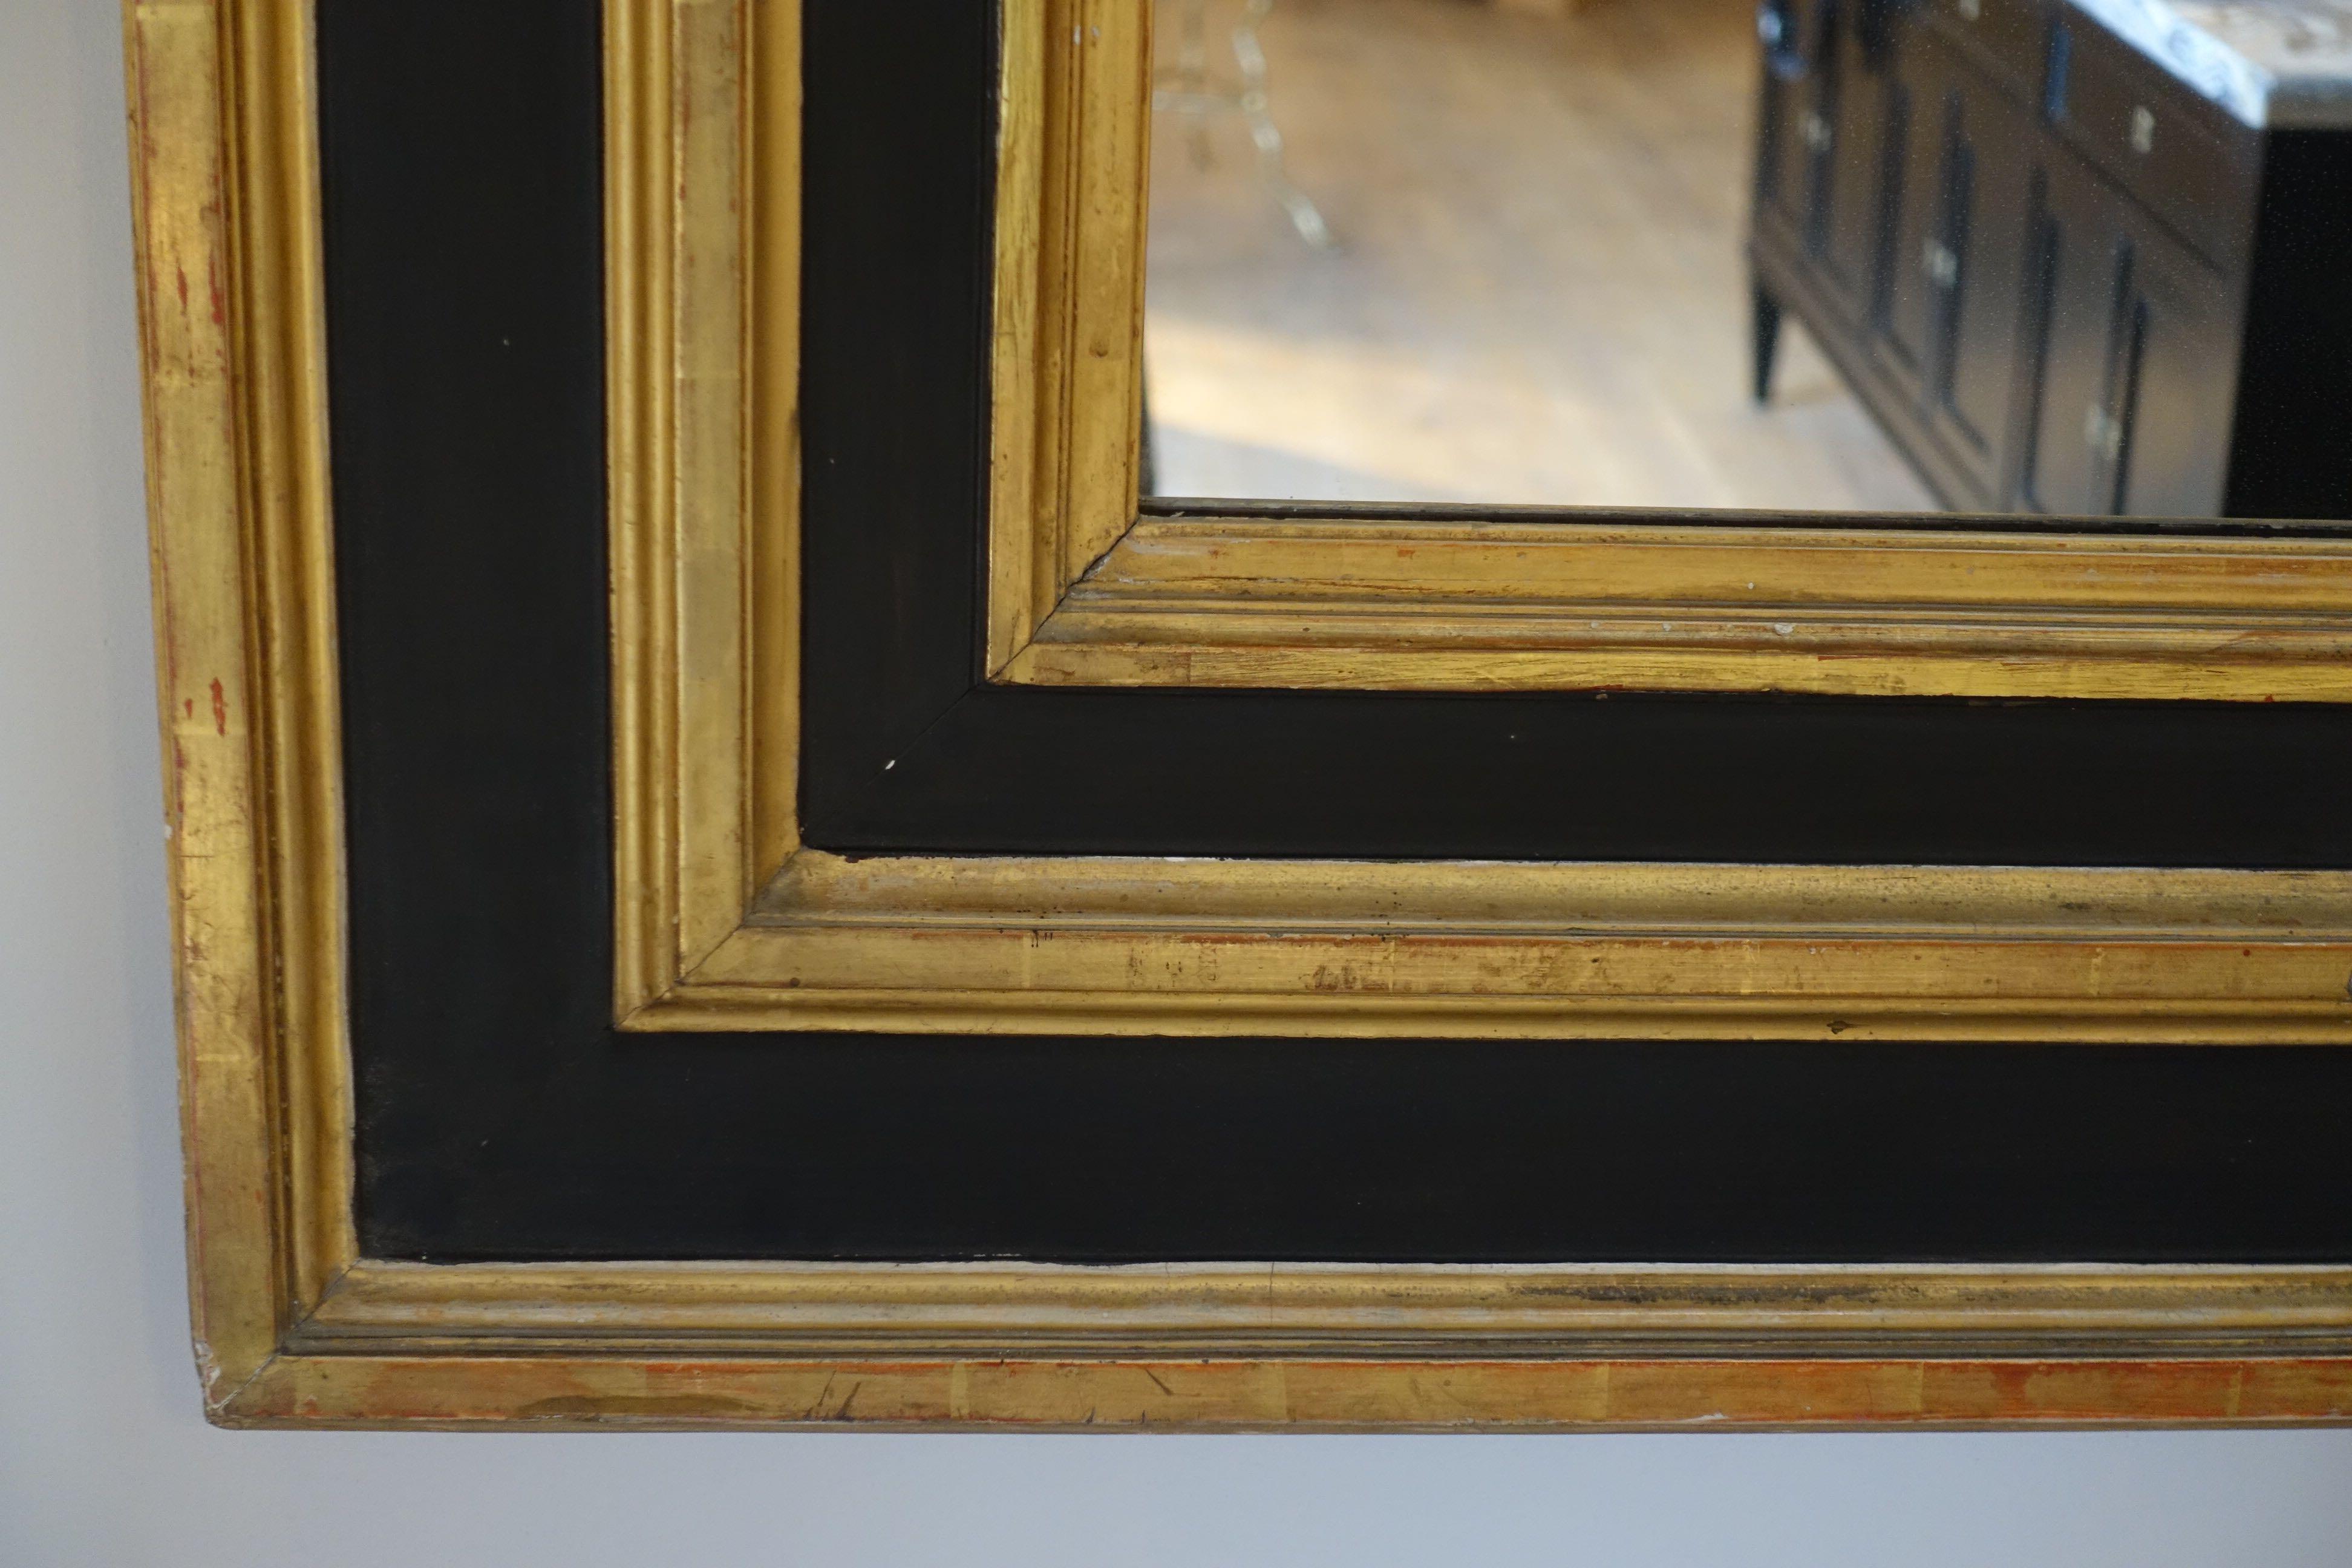 19th century French extra large mirror with ebonized black wood frame and gold gilt accent details.
Original mercury glass mirror in excellent condition.
       